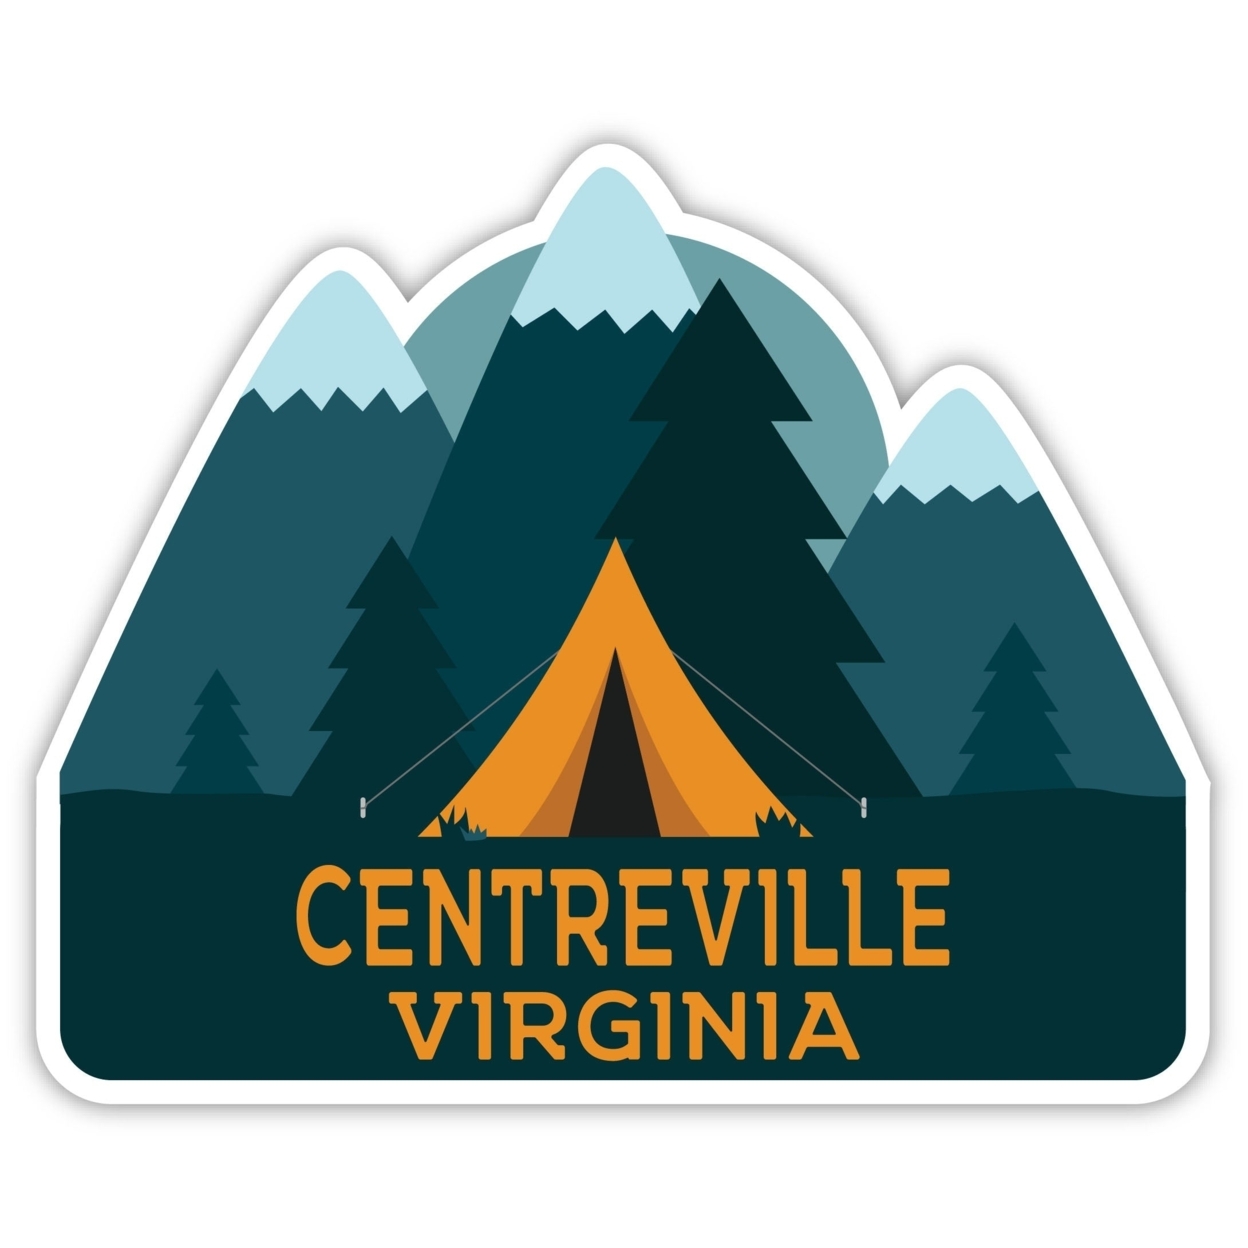 Centreville Virginia Souvenir Decorative Stickers (Choose Theme And Size) - 4-Pack, 6-Inch, Tent